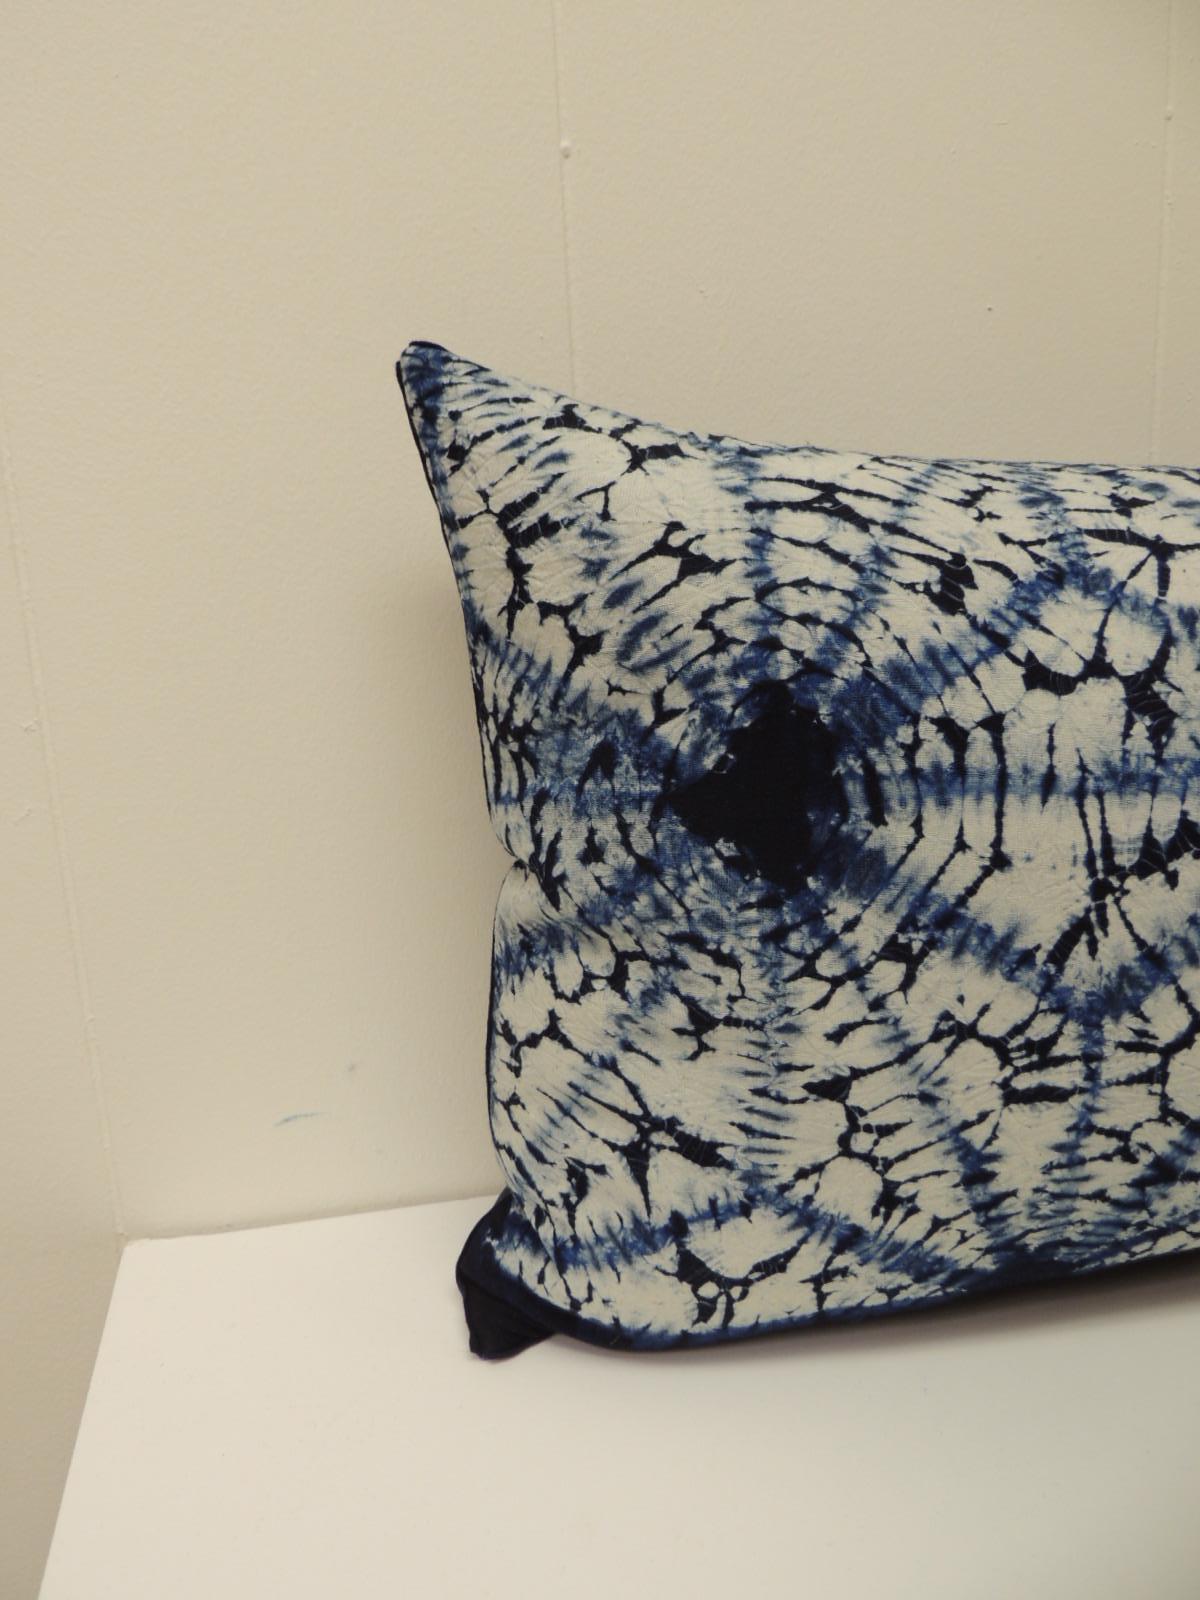 Vintage Indigo and White African Resist-dye Textile Decorative Pillow
Square pillow with navy blue linen backing and small dark blue decorative trim all around made from the same vintage textile.
Decorative pillows handmade and designed in the USA.